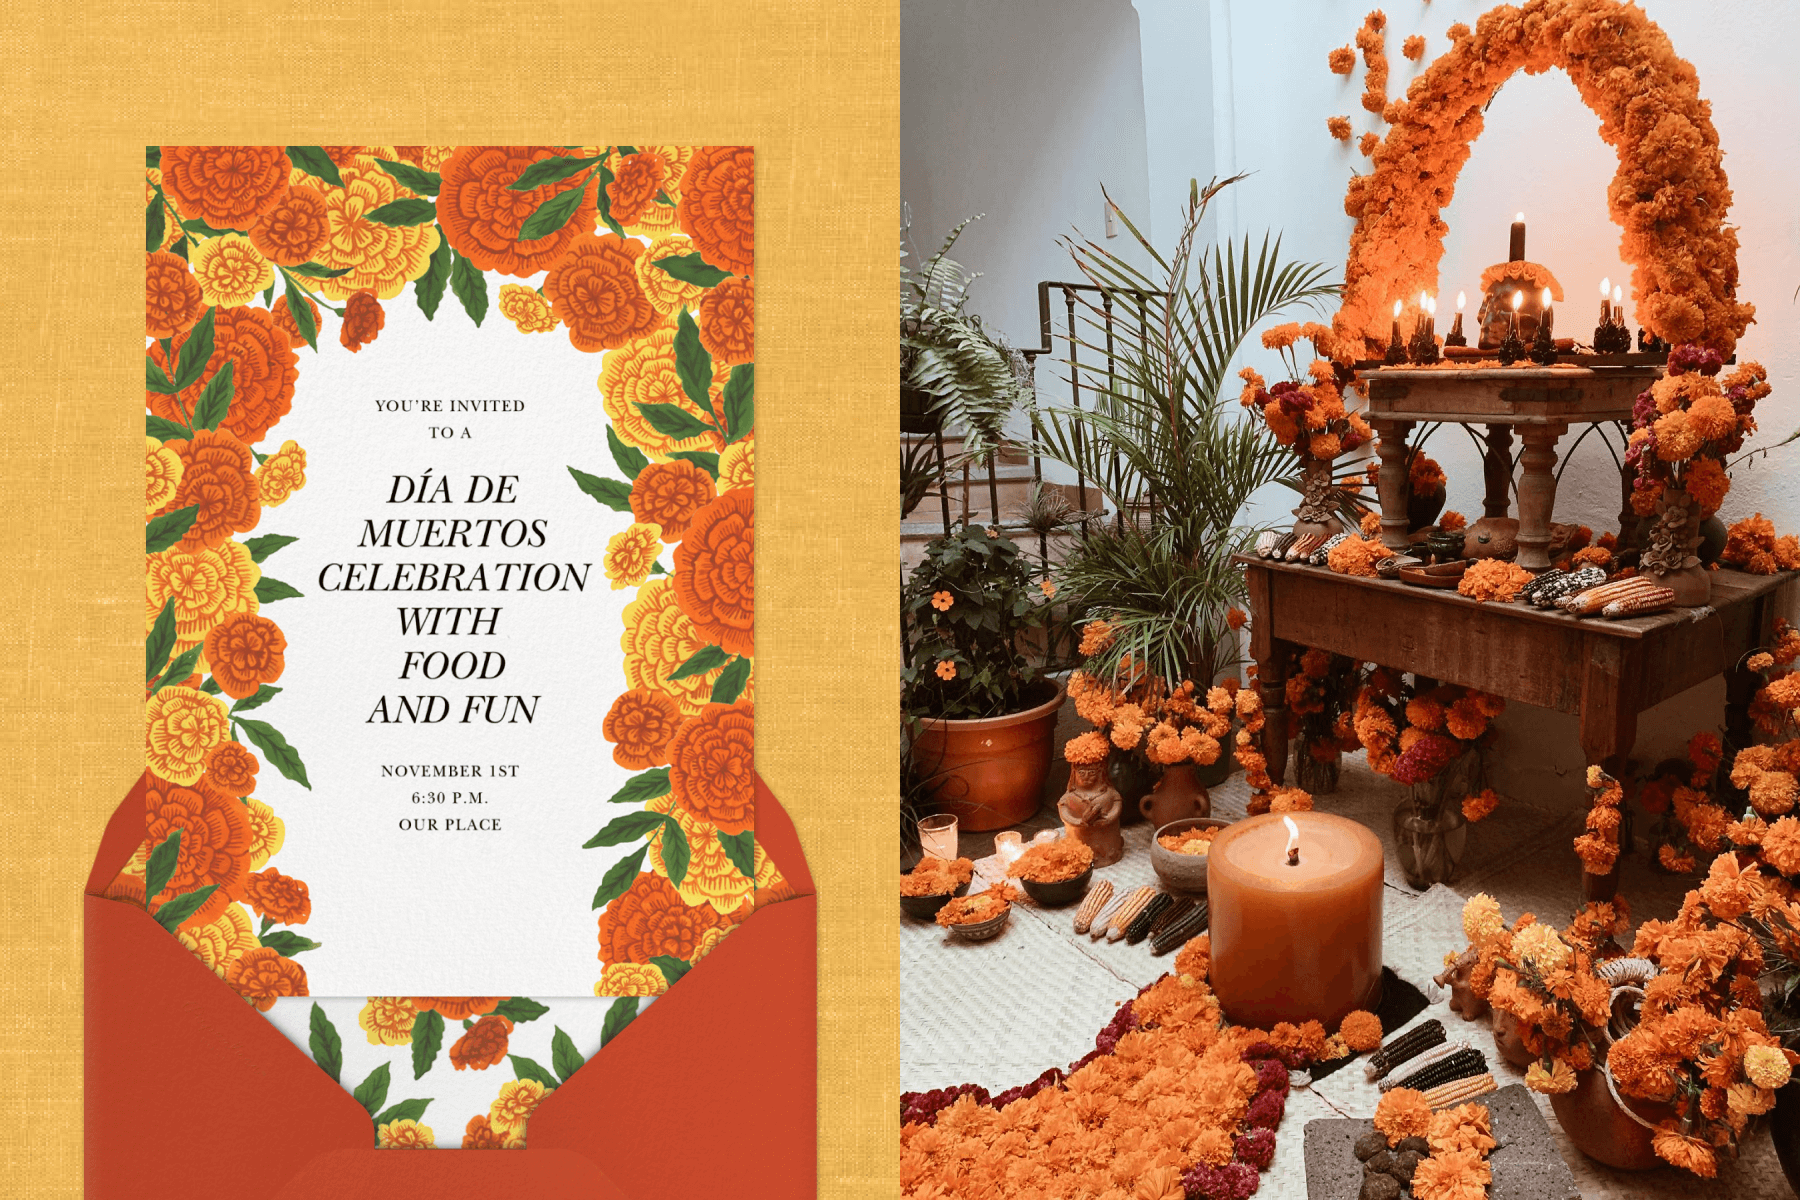 Left: A Dia de Muertos invitations with an illustrated marigold frame; Right: An image of an Ofrenda with two tables stacked as an altar, candles, and marigolds.